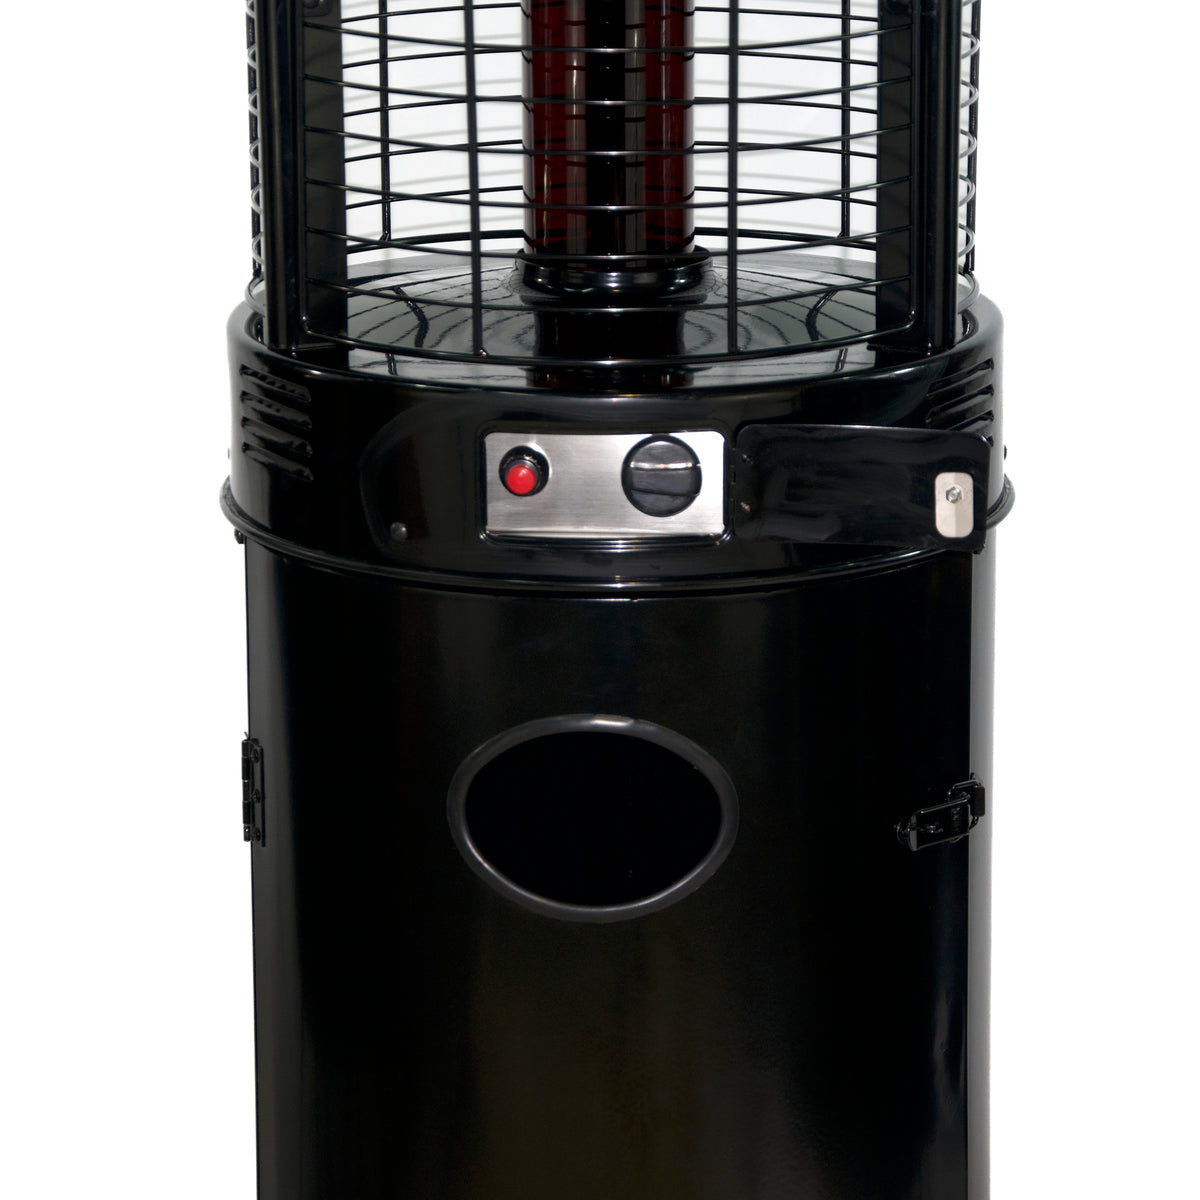 RADtec 80&quot; Ellipse Flame Propane Patio Heater - Black with Ruby Glass